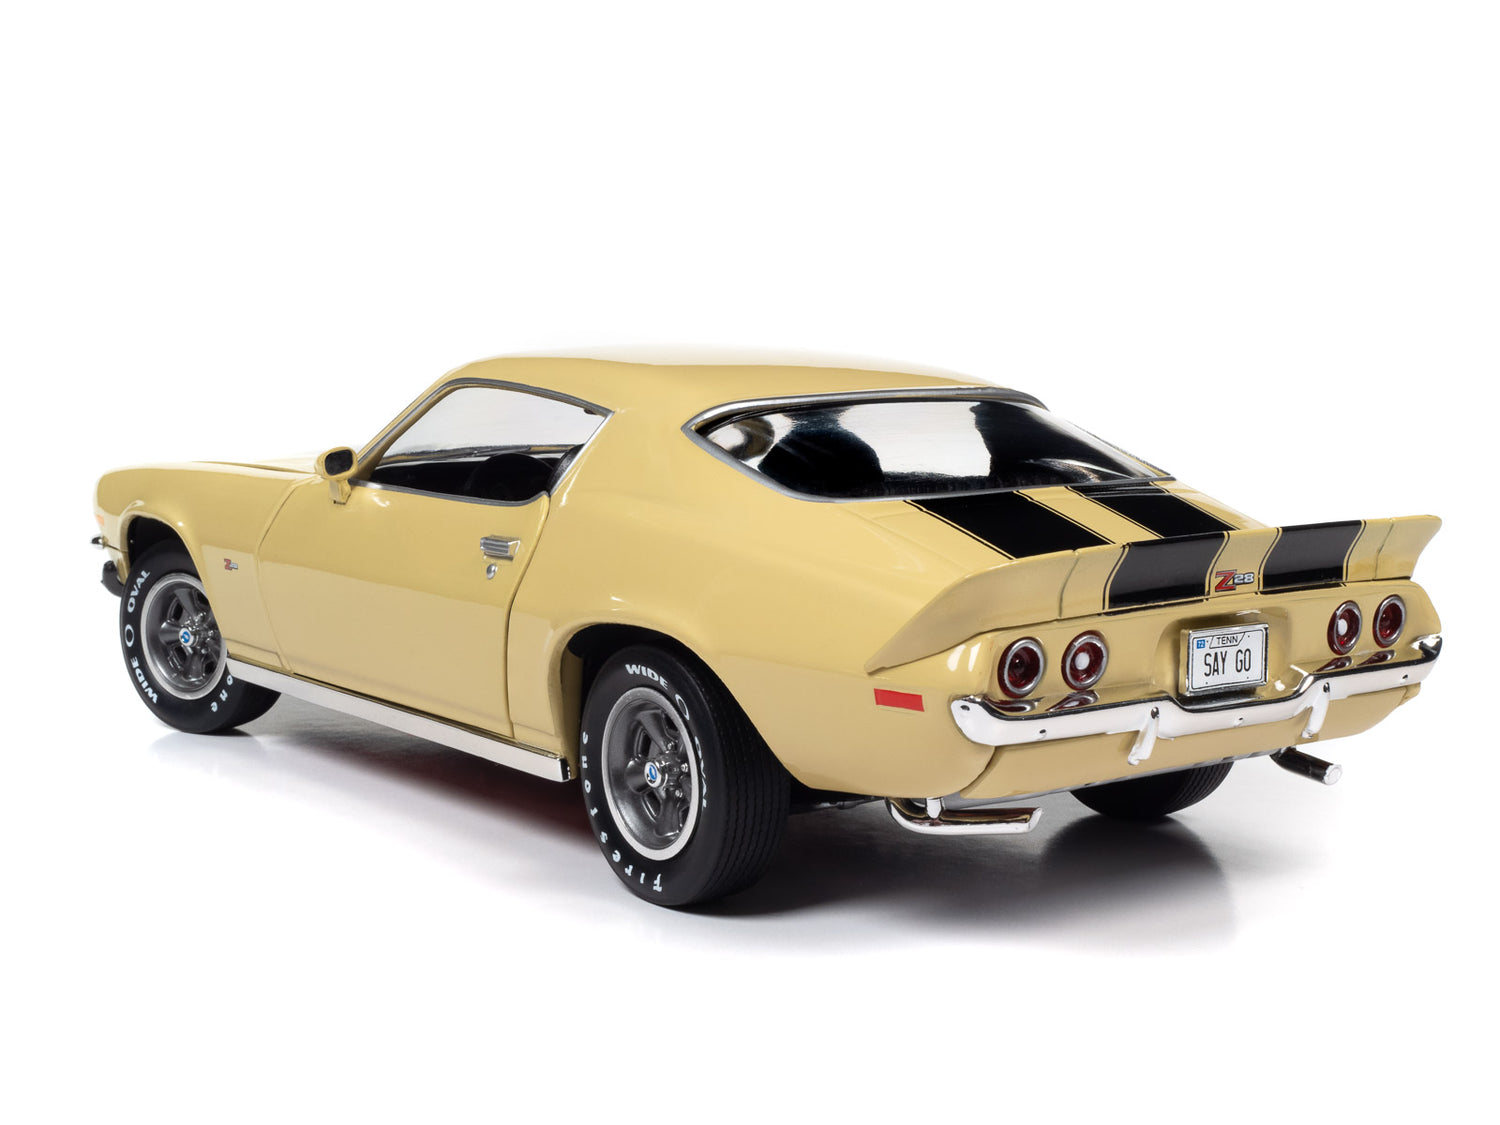 American Muscle 1972 Chevrolet Camaro Z/28 RS 1:18 Scale Diecast